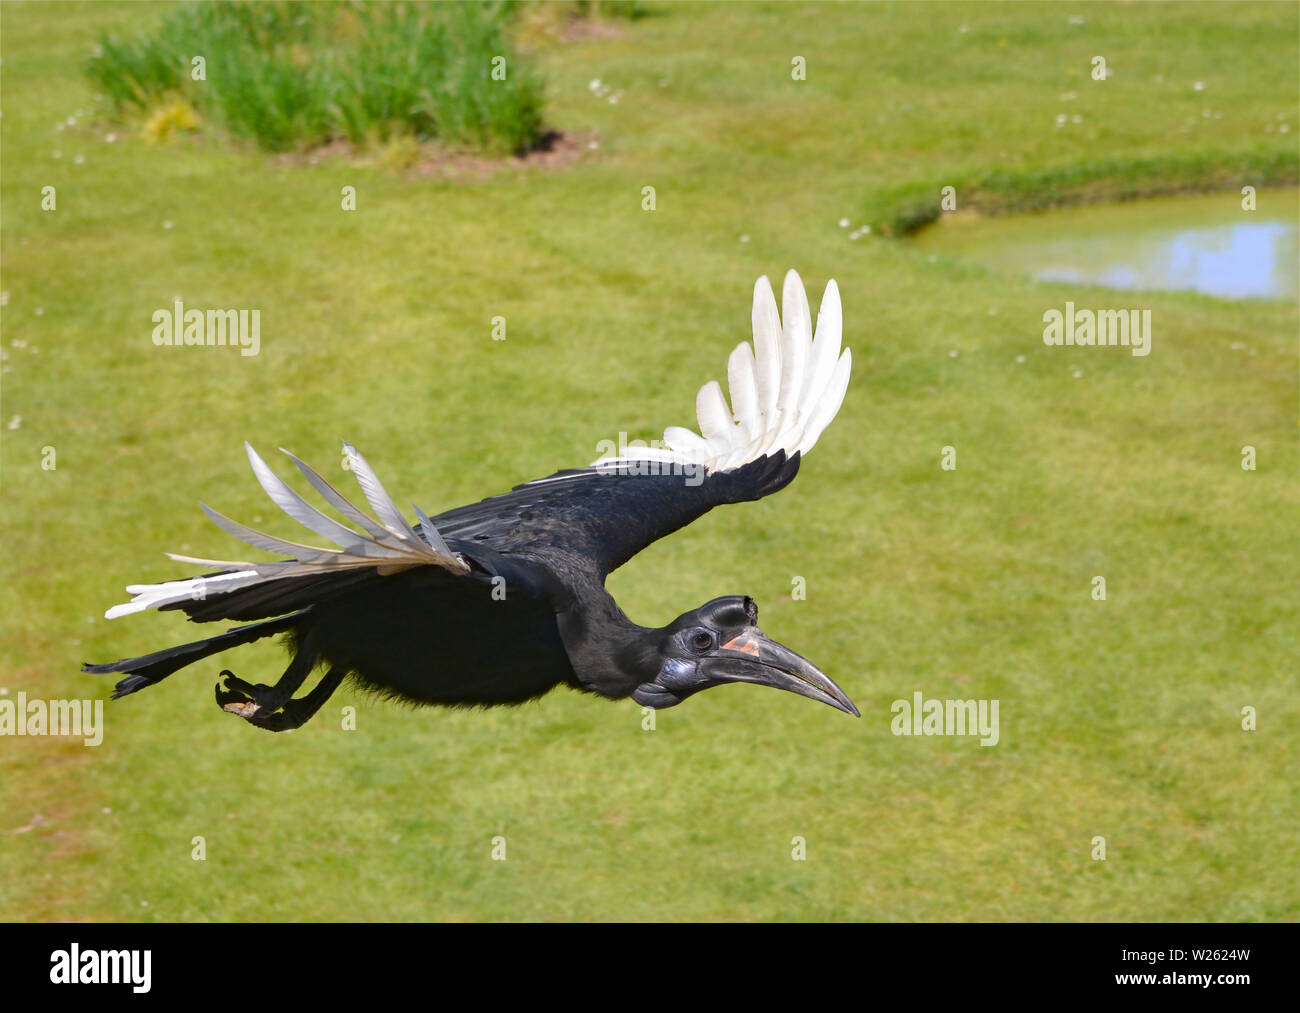 Abyssinian ground hornbill or northern ground hornbill (Bucorvus abyssinicus) in flight view from above Stock Photo